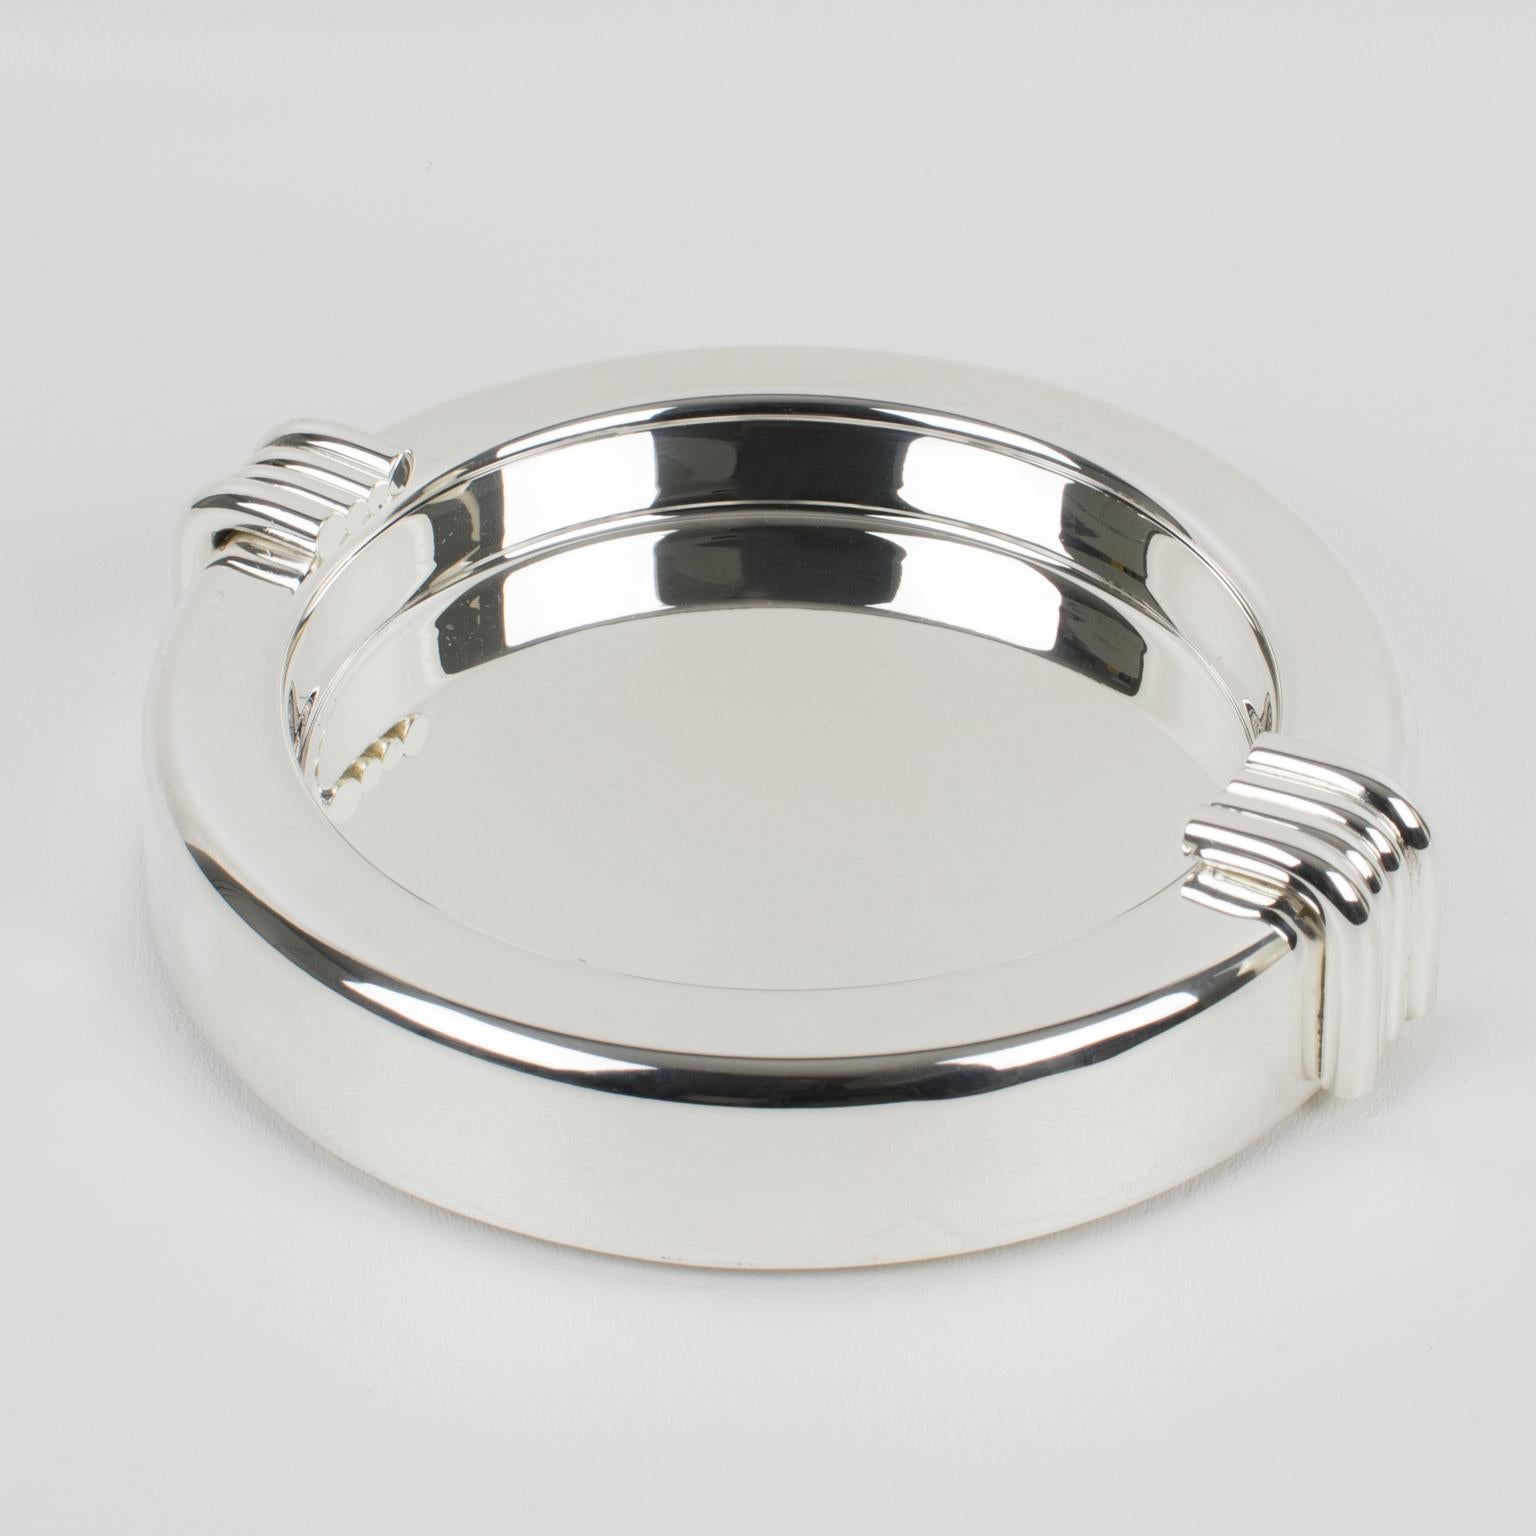 Elegant Christian Dior, Paris modernist large cigar ashtray or desk accessory. This silverplate sophisticated catchall features an iconic streamlined design with clean lines. Marked underside: Christian Dior. Still in its original 1970s branded gift